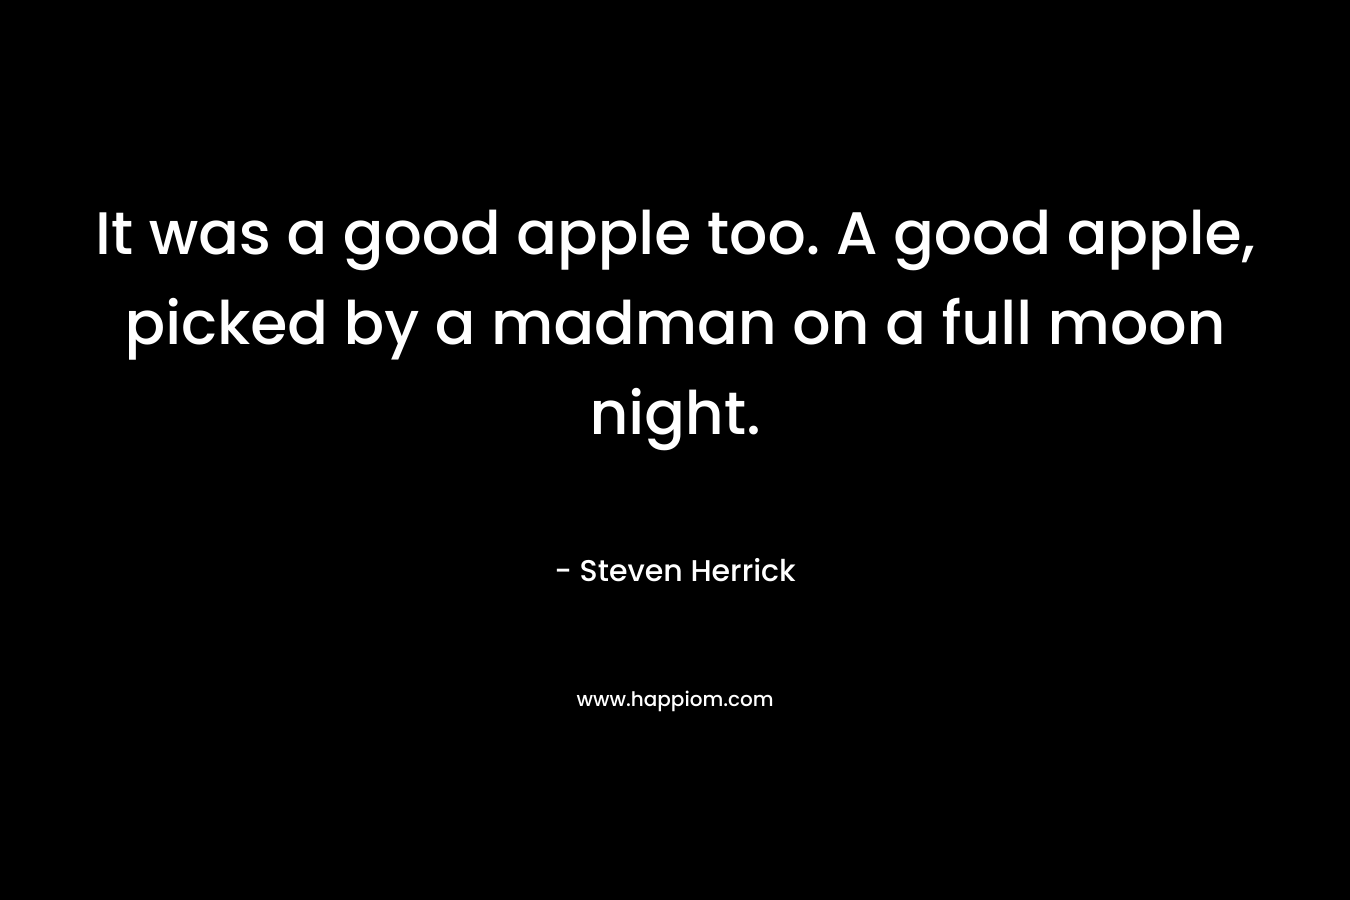 It was a good apple too. A good apple, picked by a madman on a full moon night. – Steven Herrick